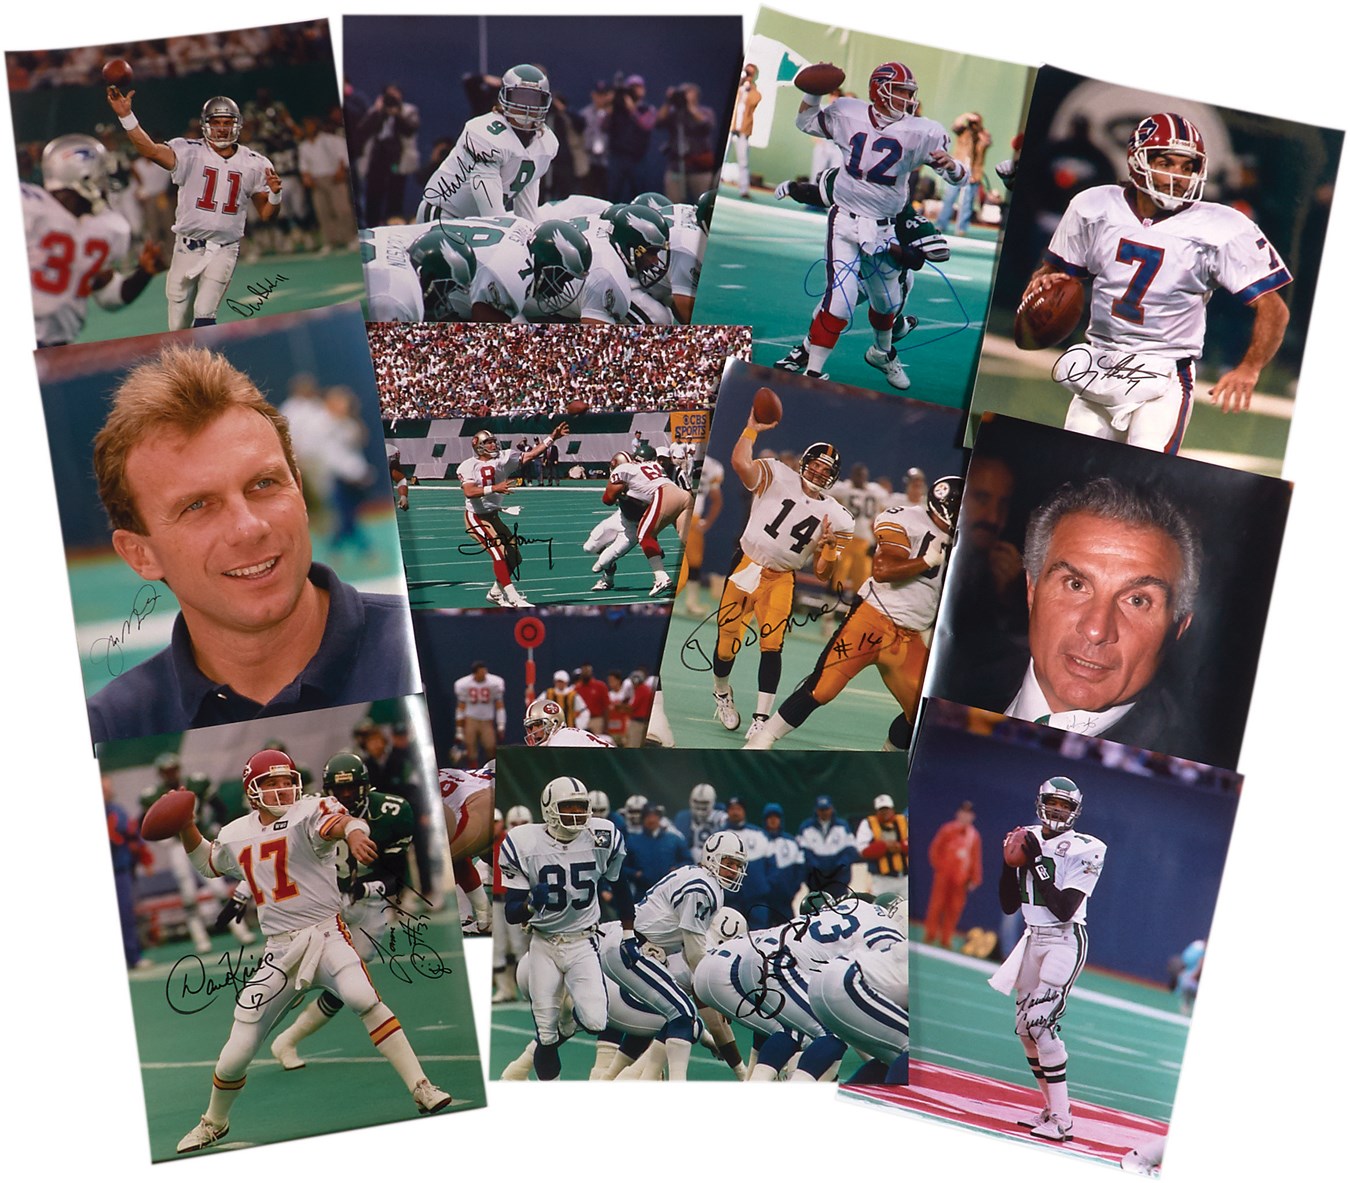 - 1980s-90s "NFL Quarterbacks" 16x20” In Person Signed Photographs from VIP Photographer Richard Brightly (12)